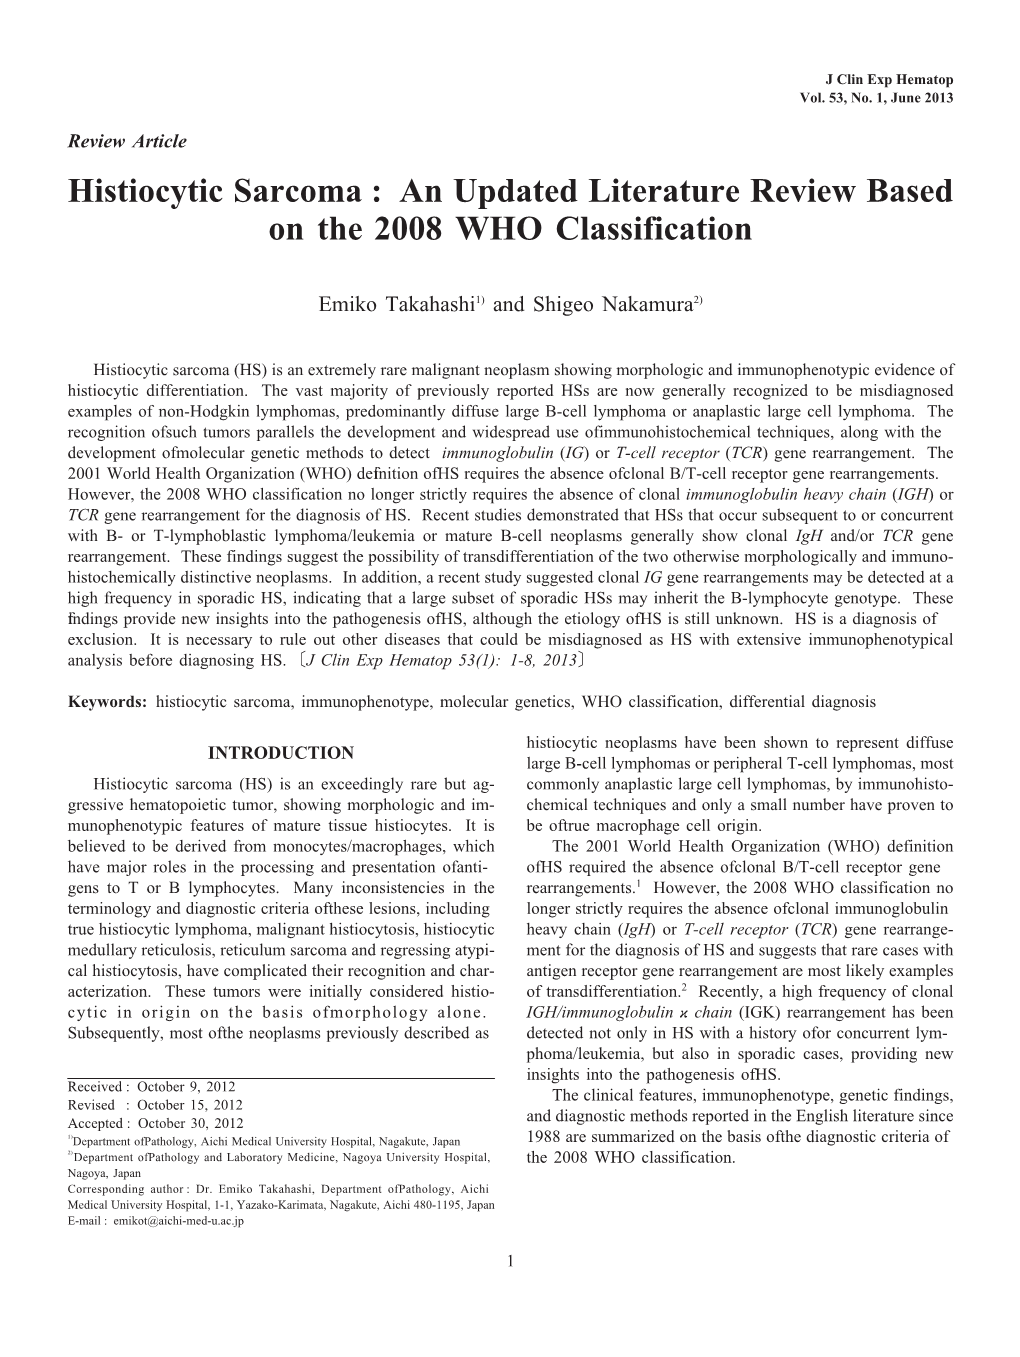 Histiocytic Sarcoma : an Updated Literature Review Based on the 2008 WHO Classification